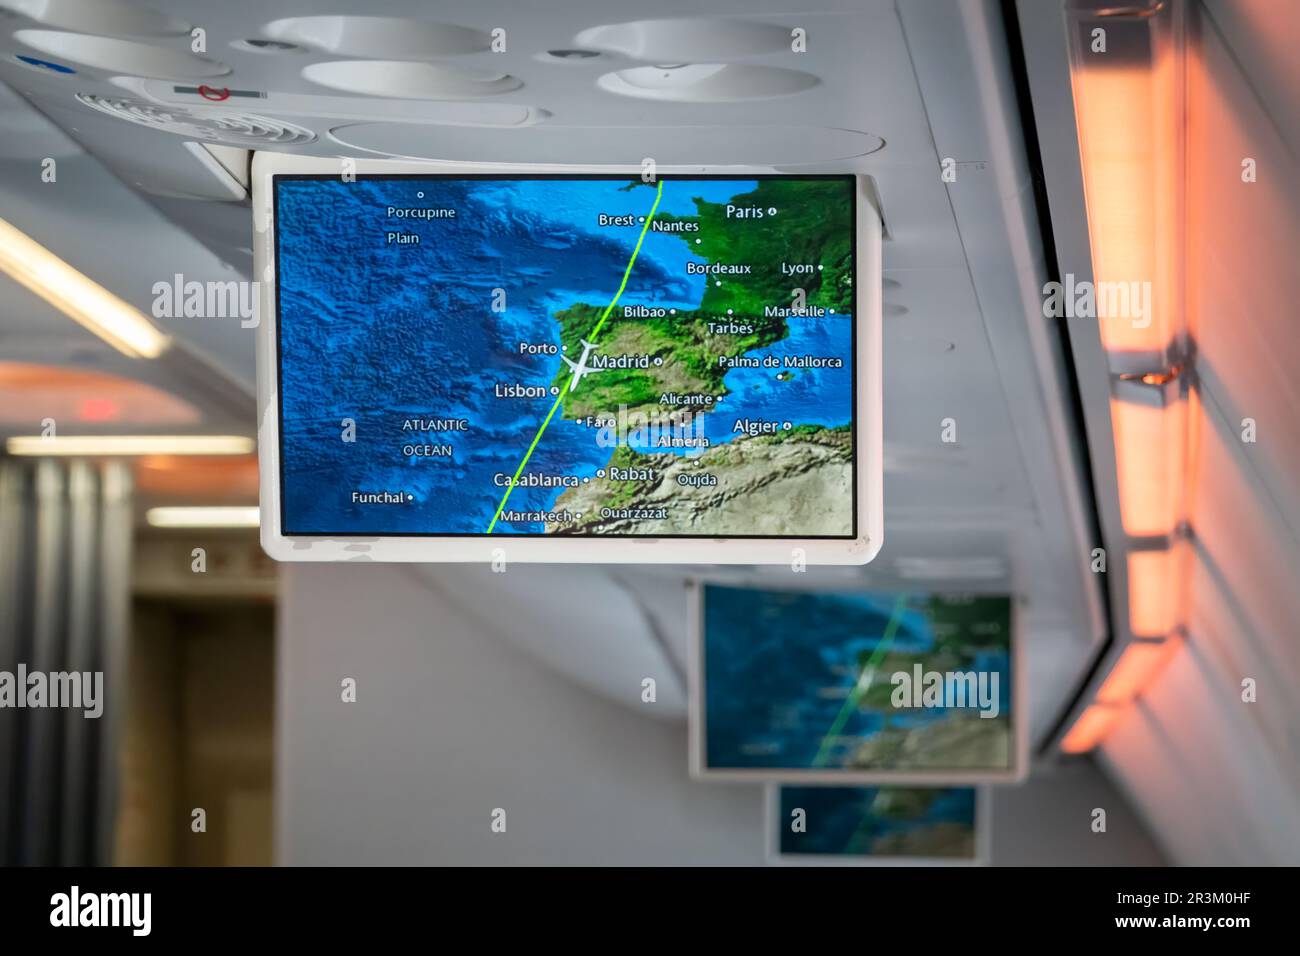 A drop down screen in an passenger aircraft cabin displays flight information for passengers with the panes current position shown on a map Stock Photo